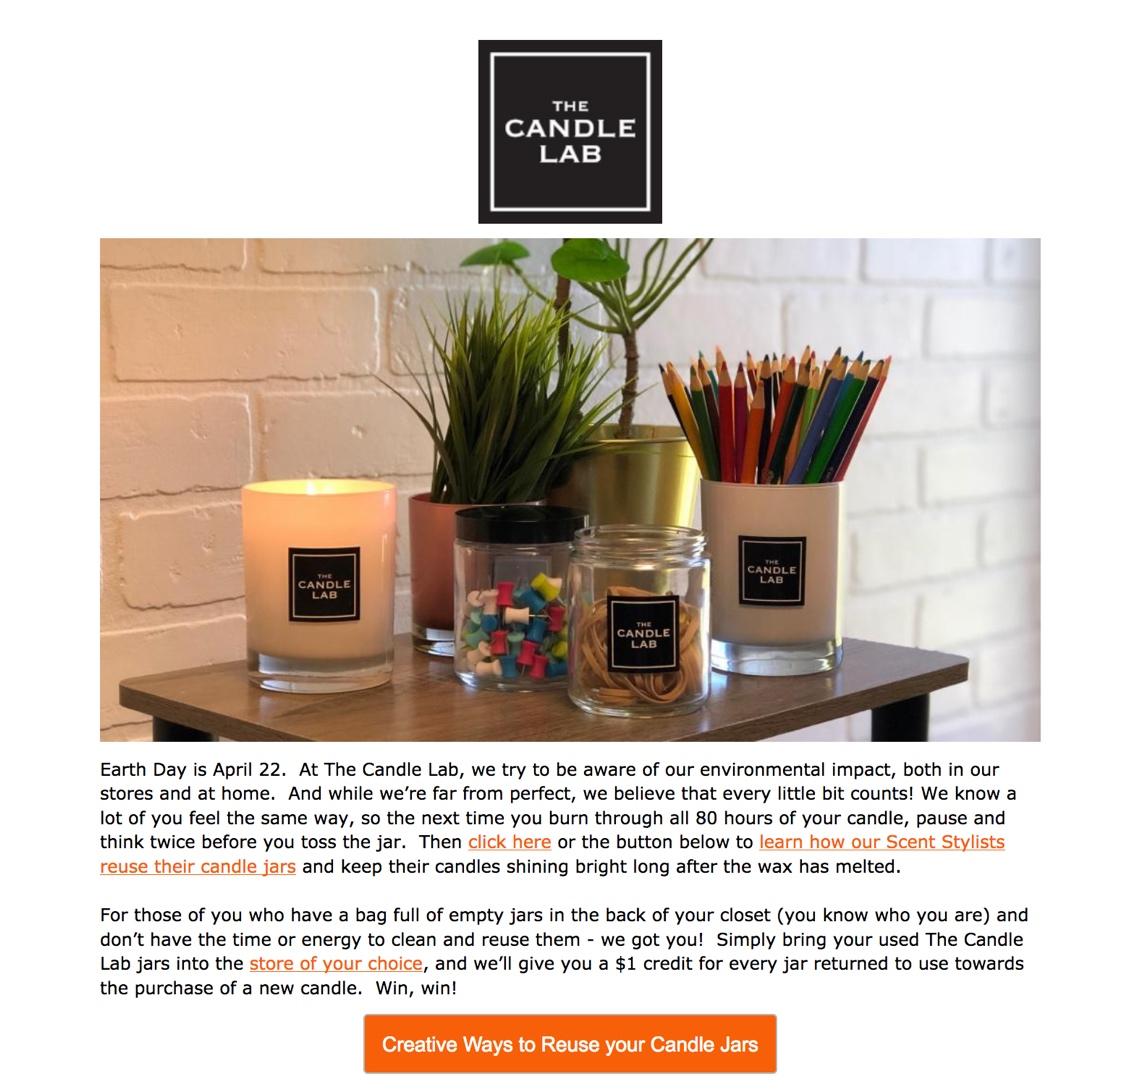 What's an fyi email? Here's an FYI email template from The Candle Lab.